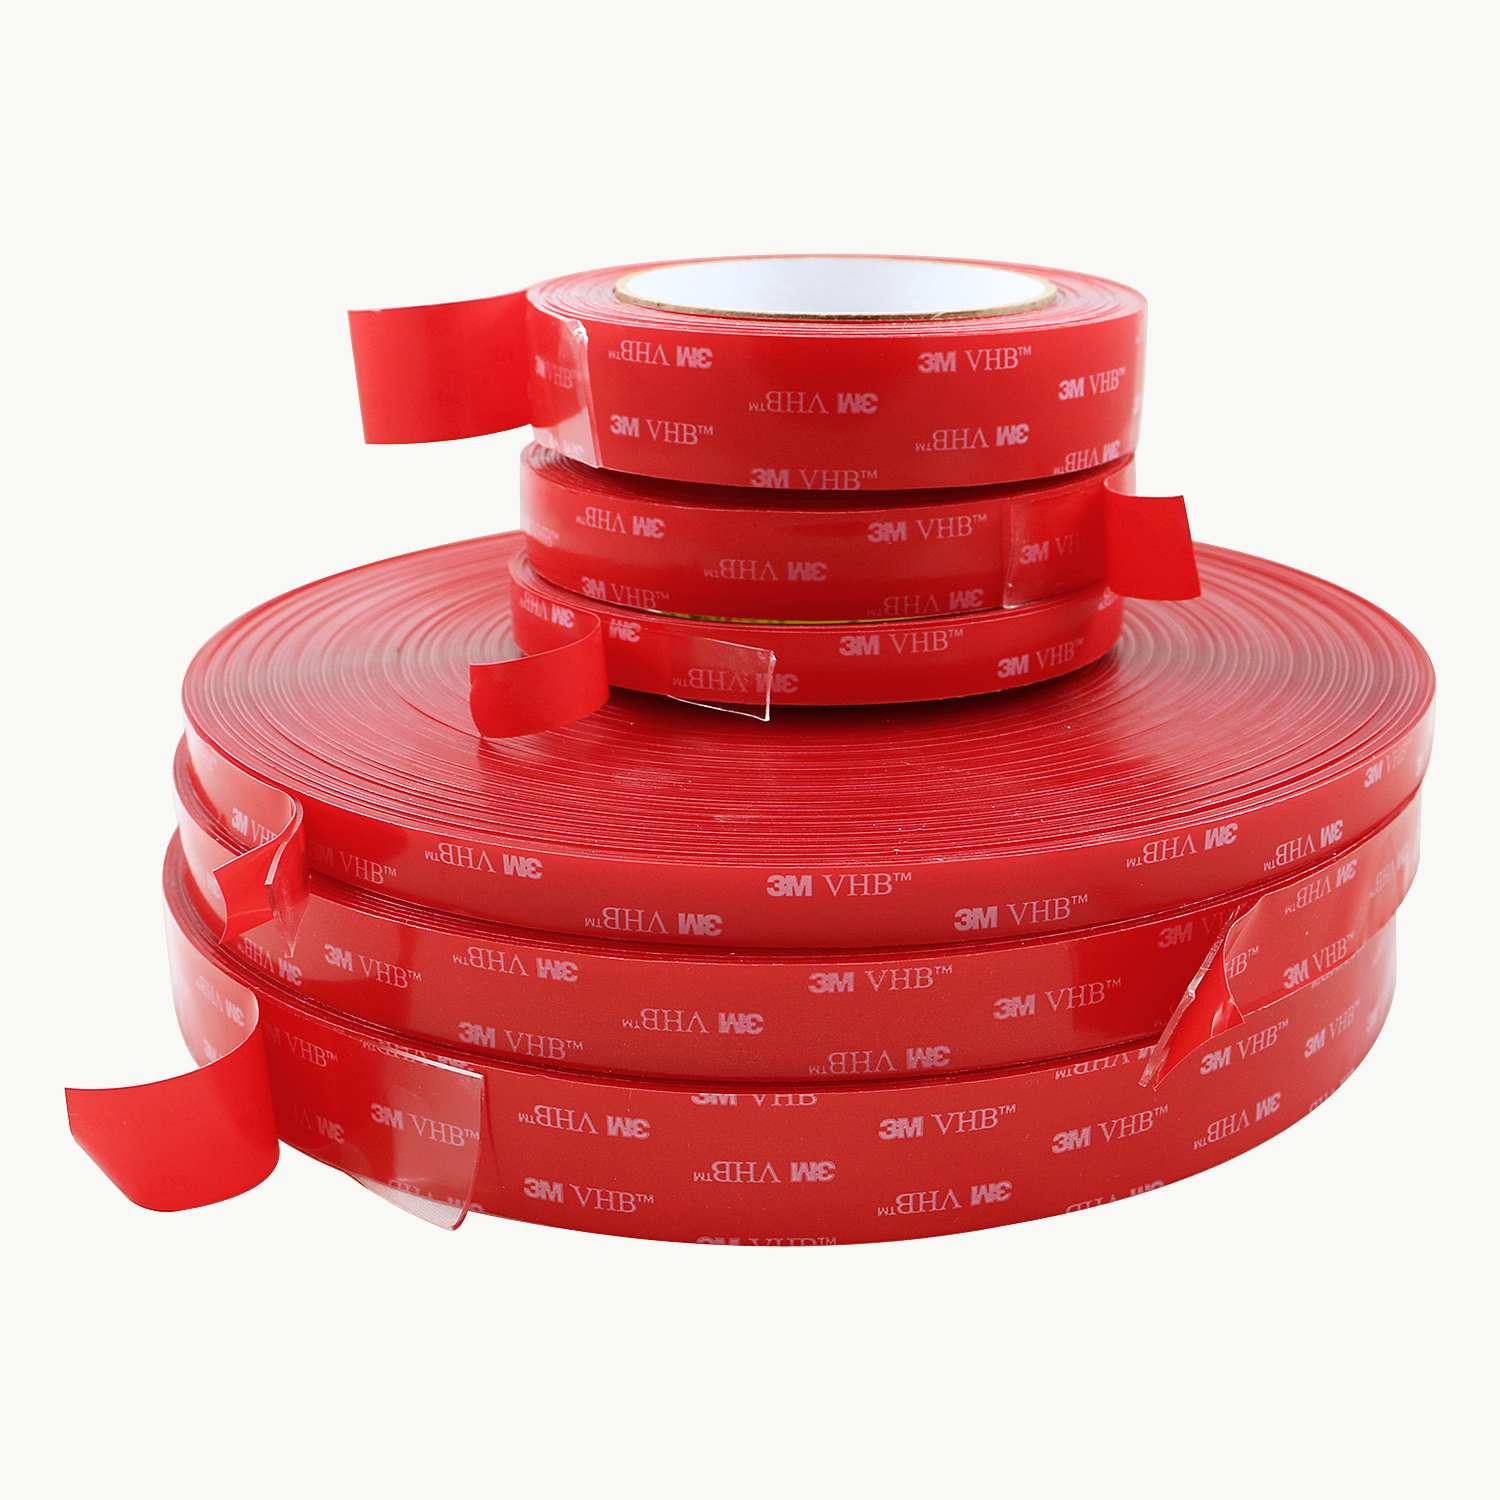 5mm VHB 4910 Double-sided Clear Transparent Acrylic Foam Adhesive Tape 3m S3